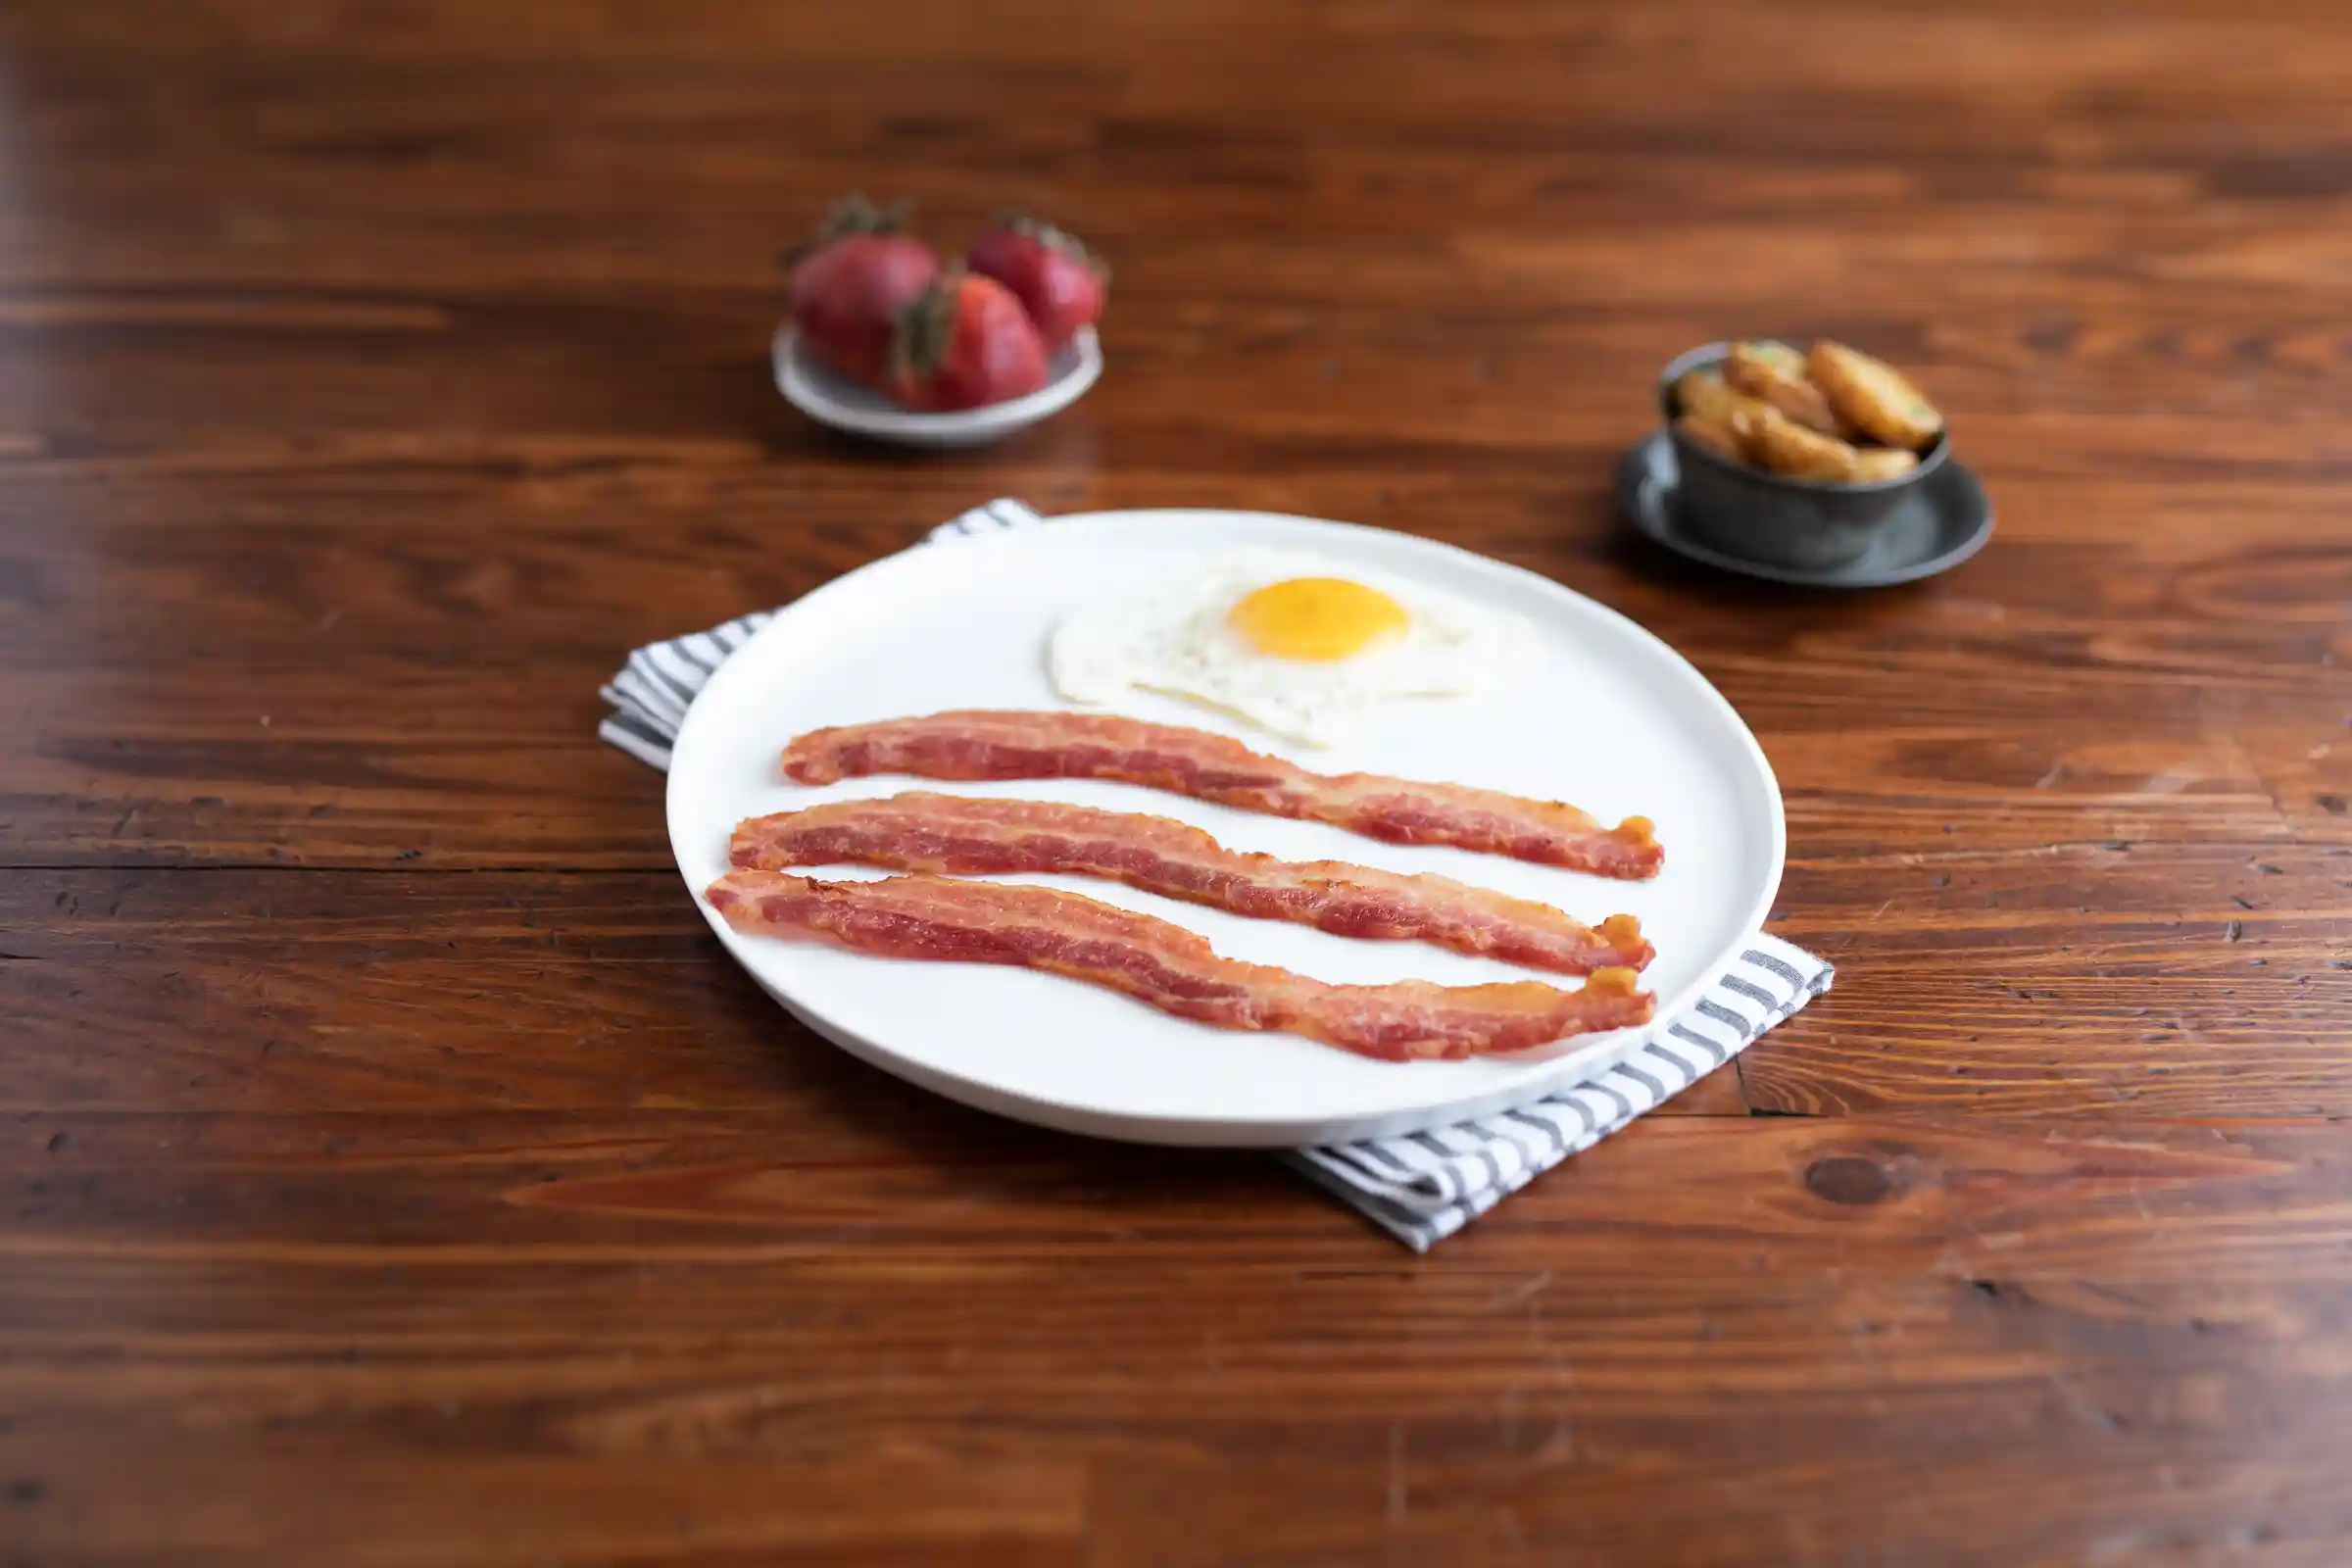 Wright® Brand Naturally Applewood Smoked Thin Sliced Bacon, Bulk, 15 Lbs, 18-22 Slices per Pound, Gas Flushed_image_01